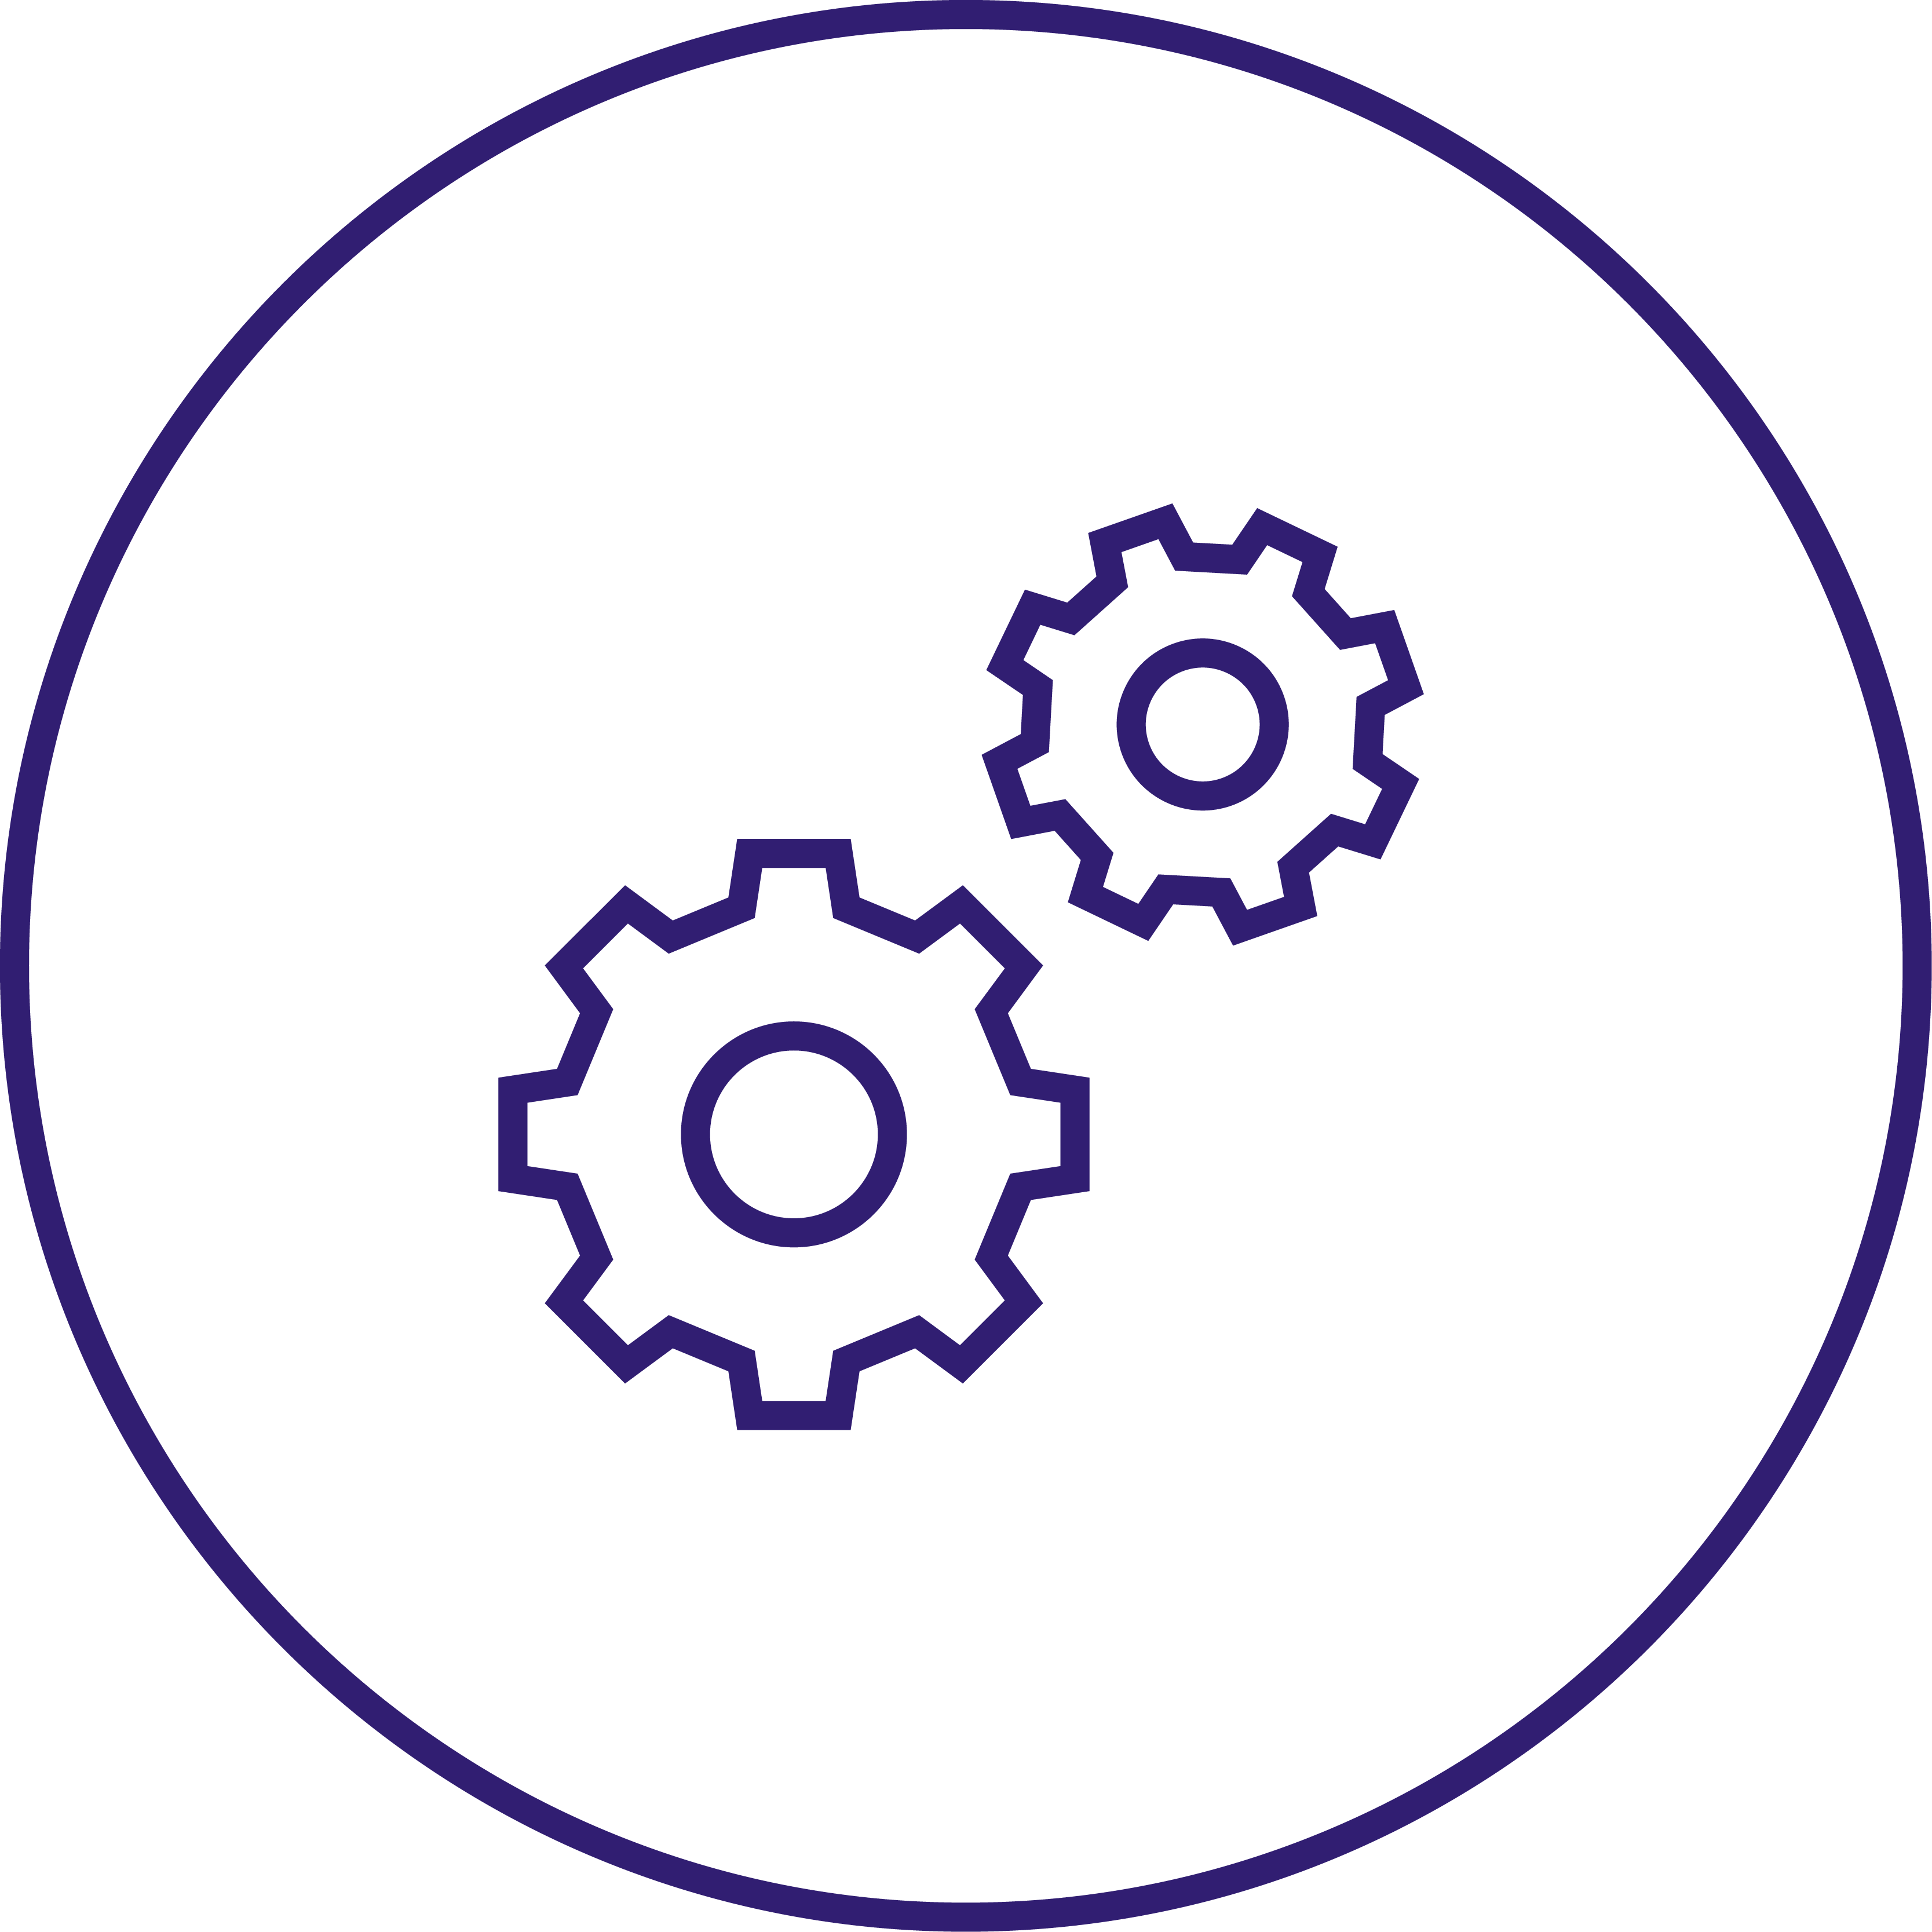 icon containing two gears inside a purple circle